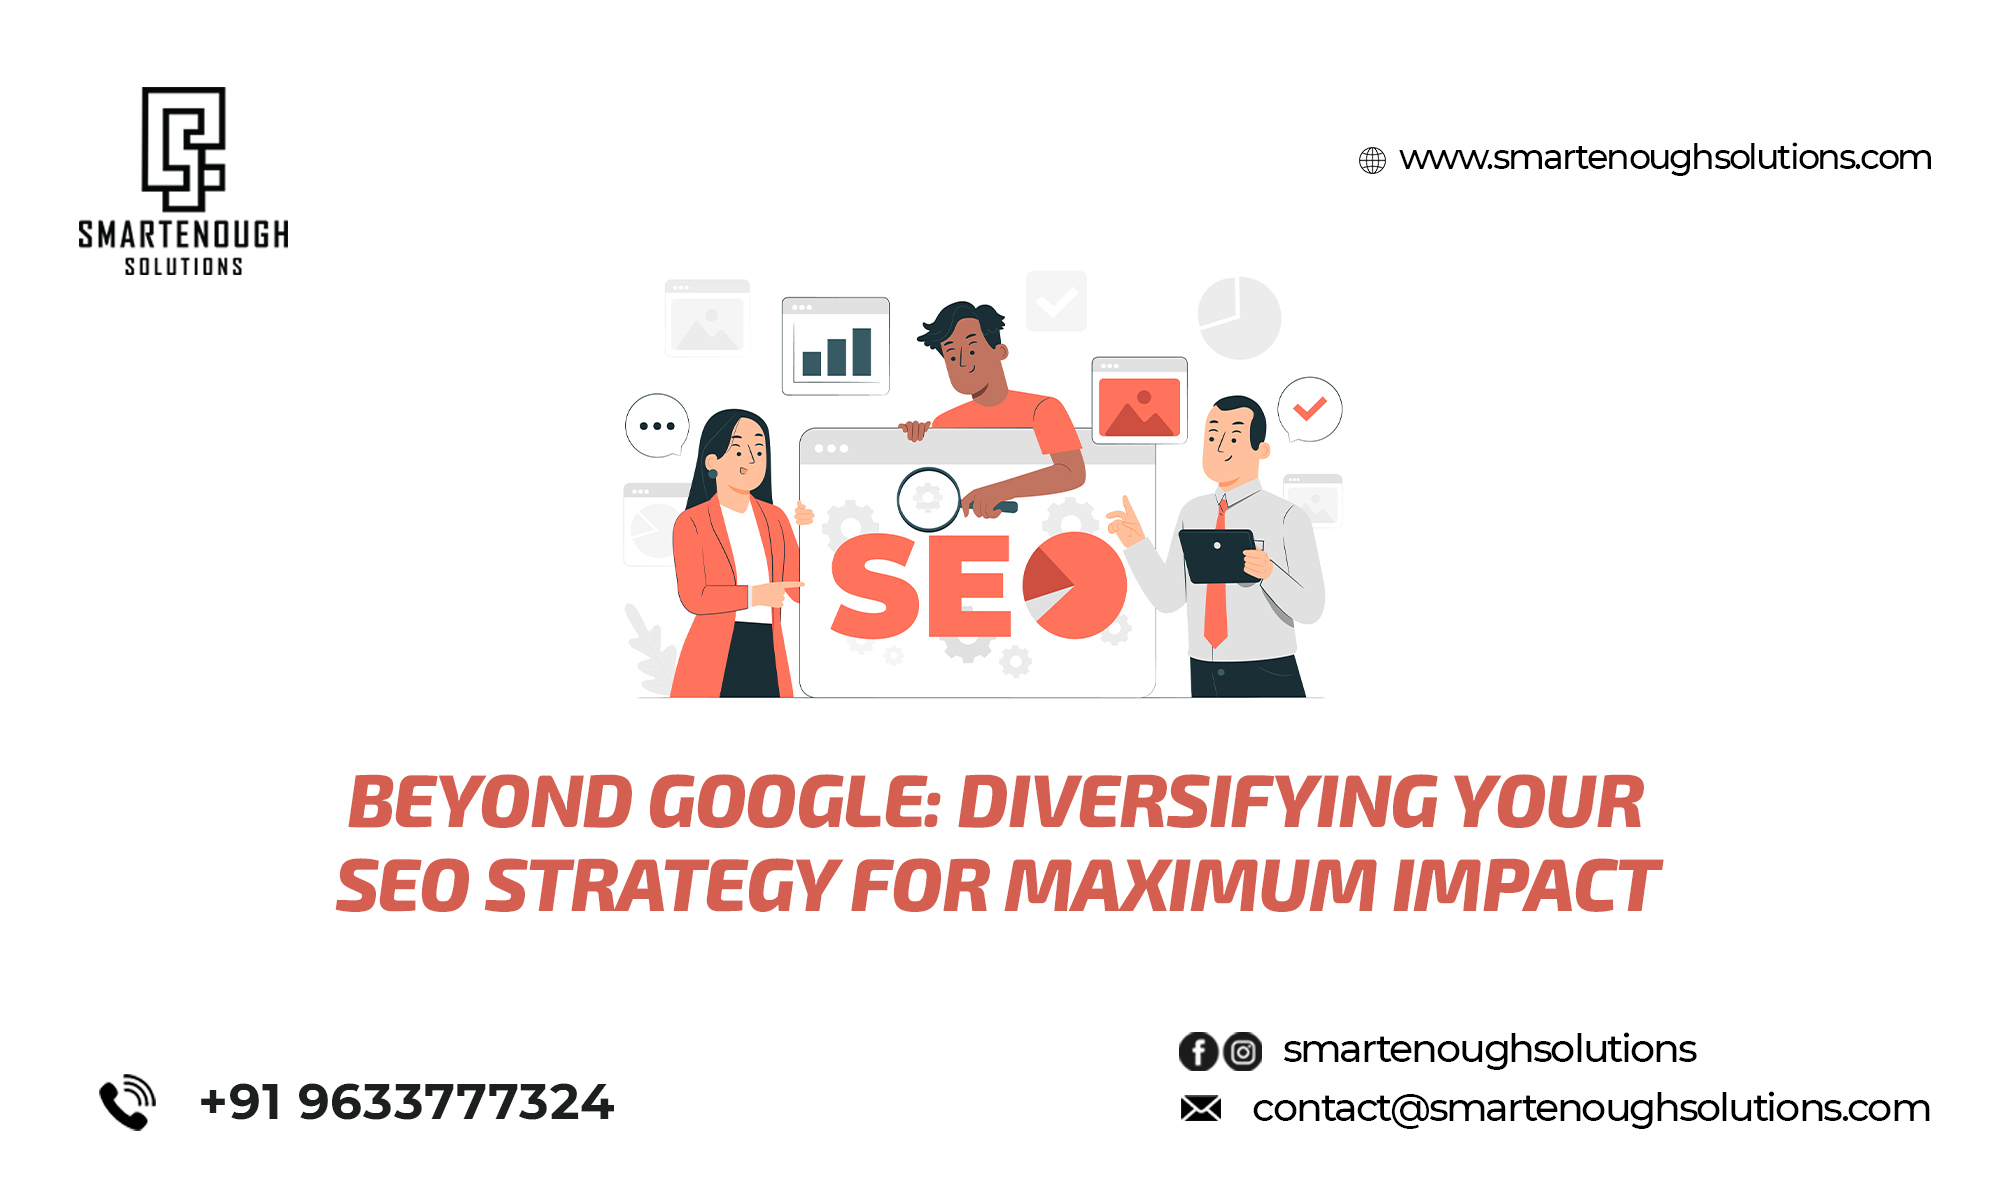 Beyond Google: Diversifying Your SEO Strategy for Maximum Impact